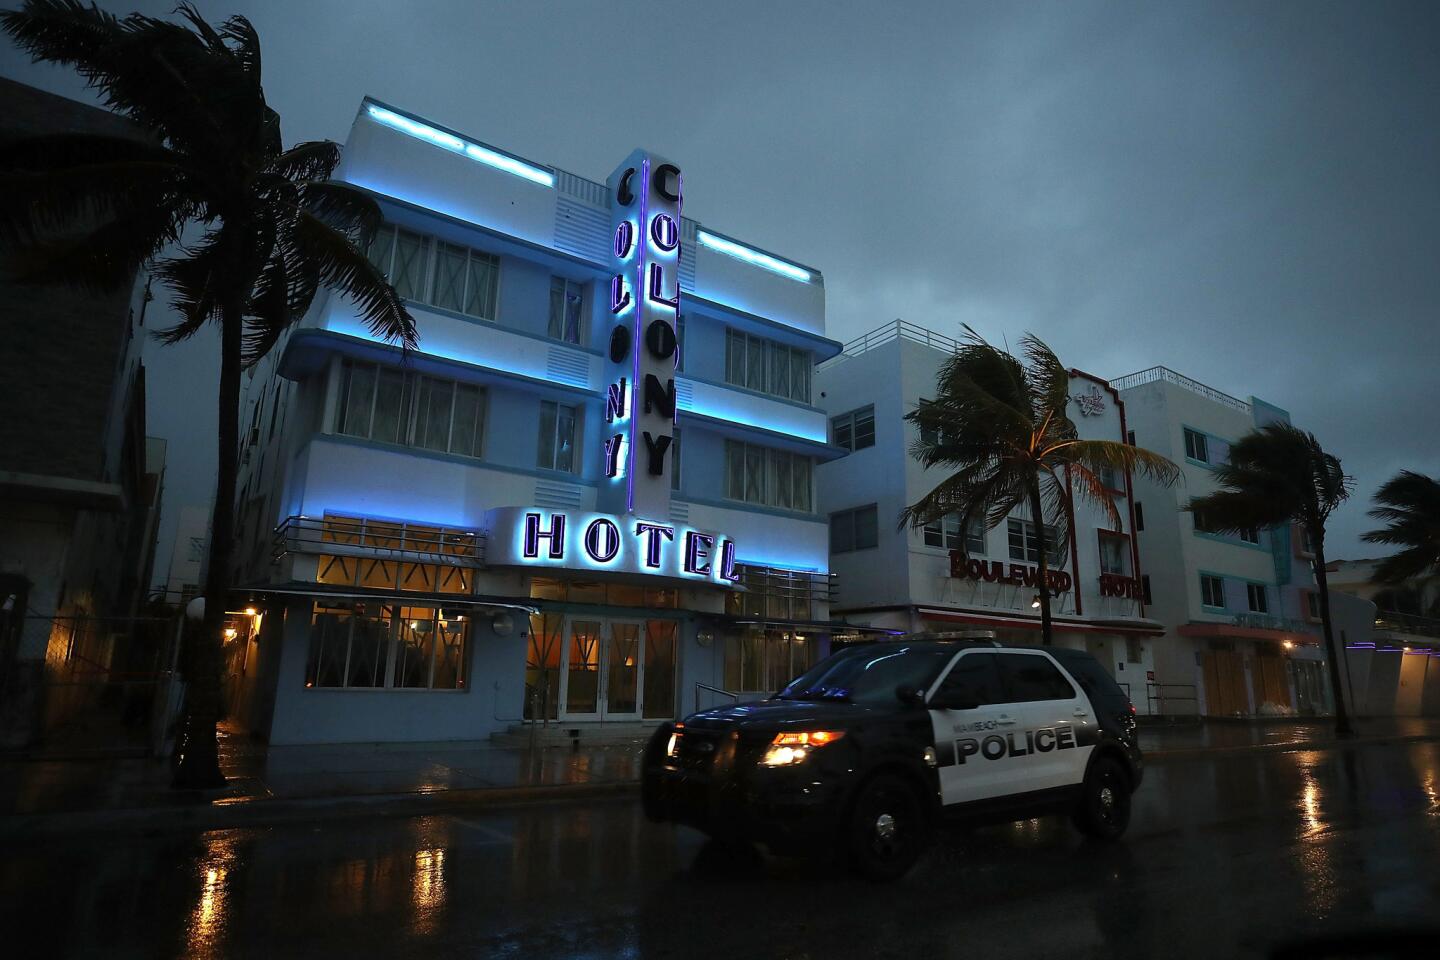 Police patrol along Ocean Drive as Miami starts to feel the effects of the approaching Hurricane Irma on Sept. 9, 2017.